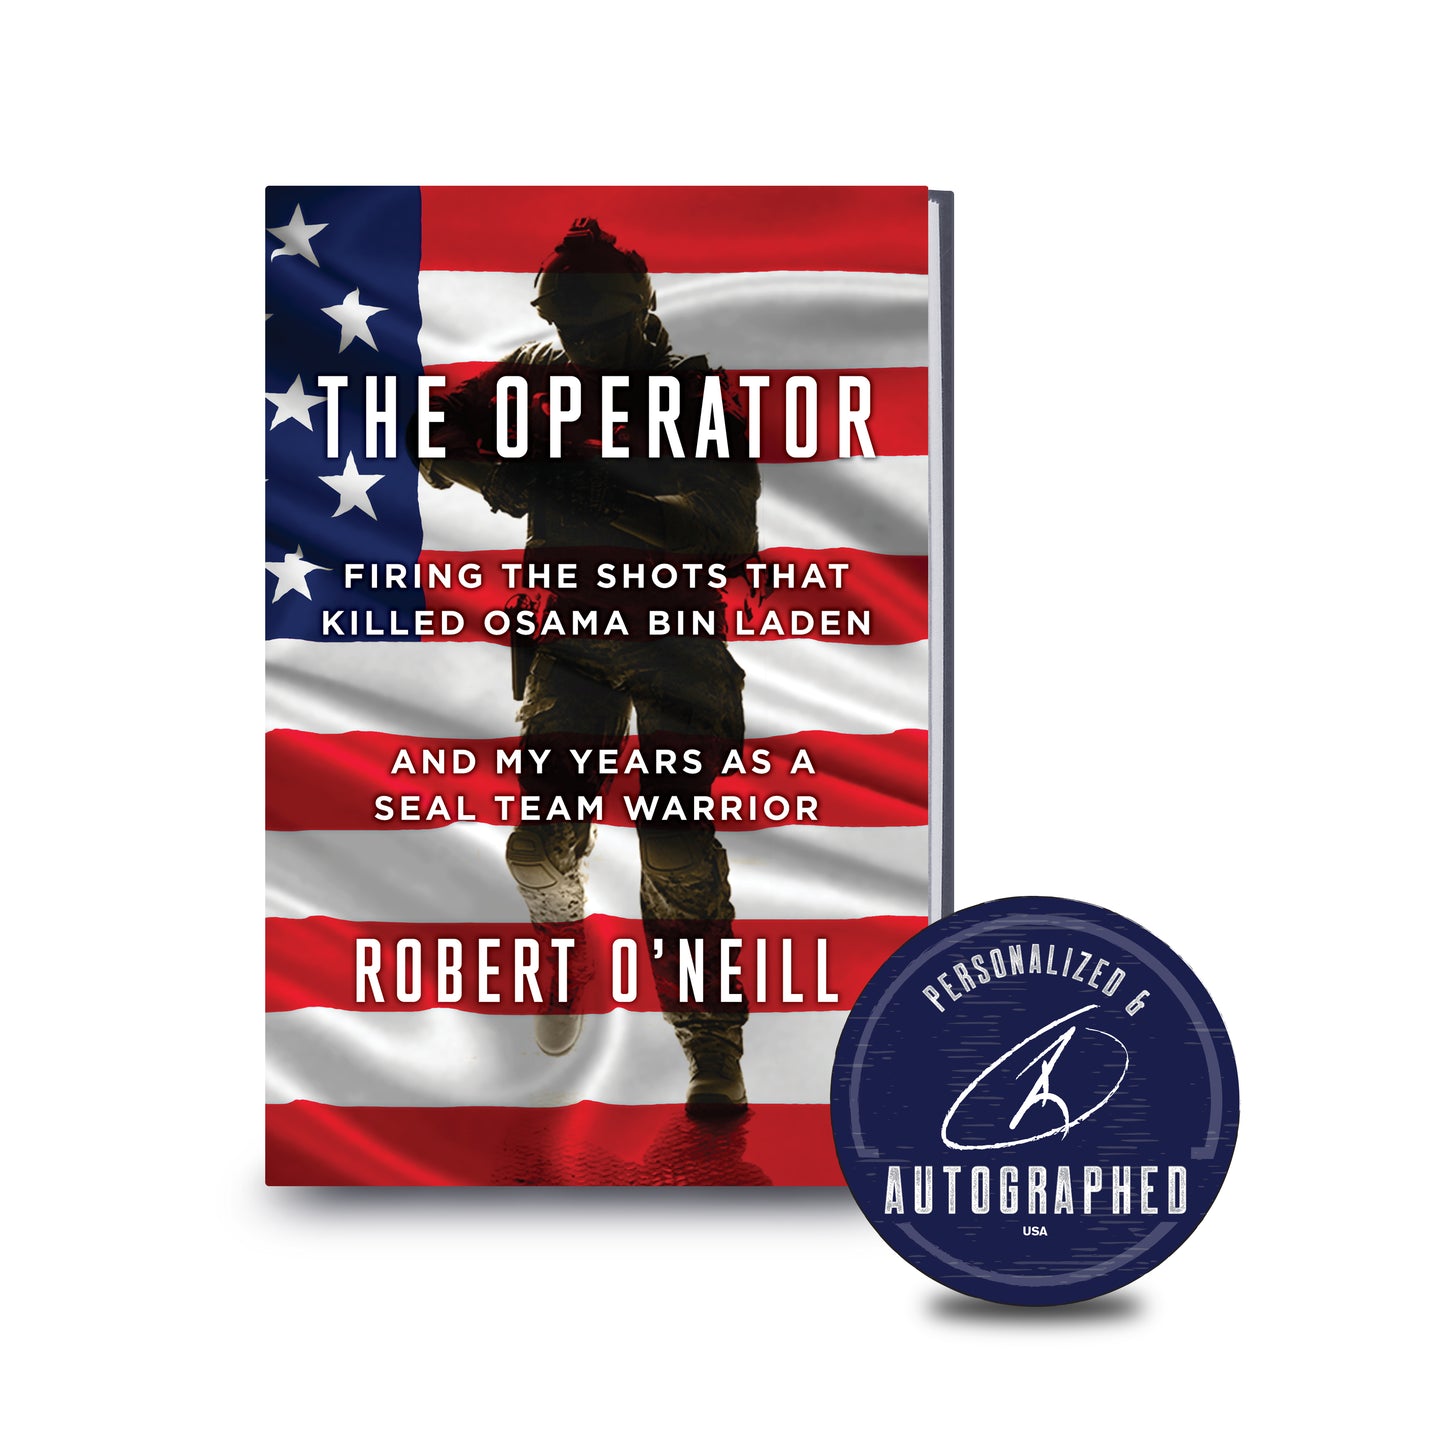 The Operator Robert O'Neill personalized and autographed book RJO